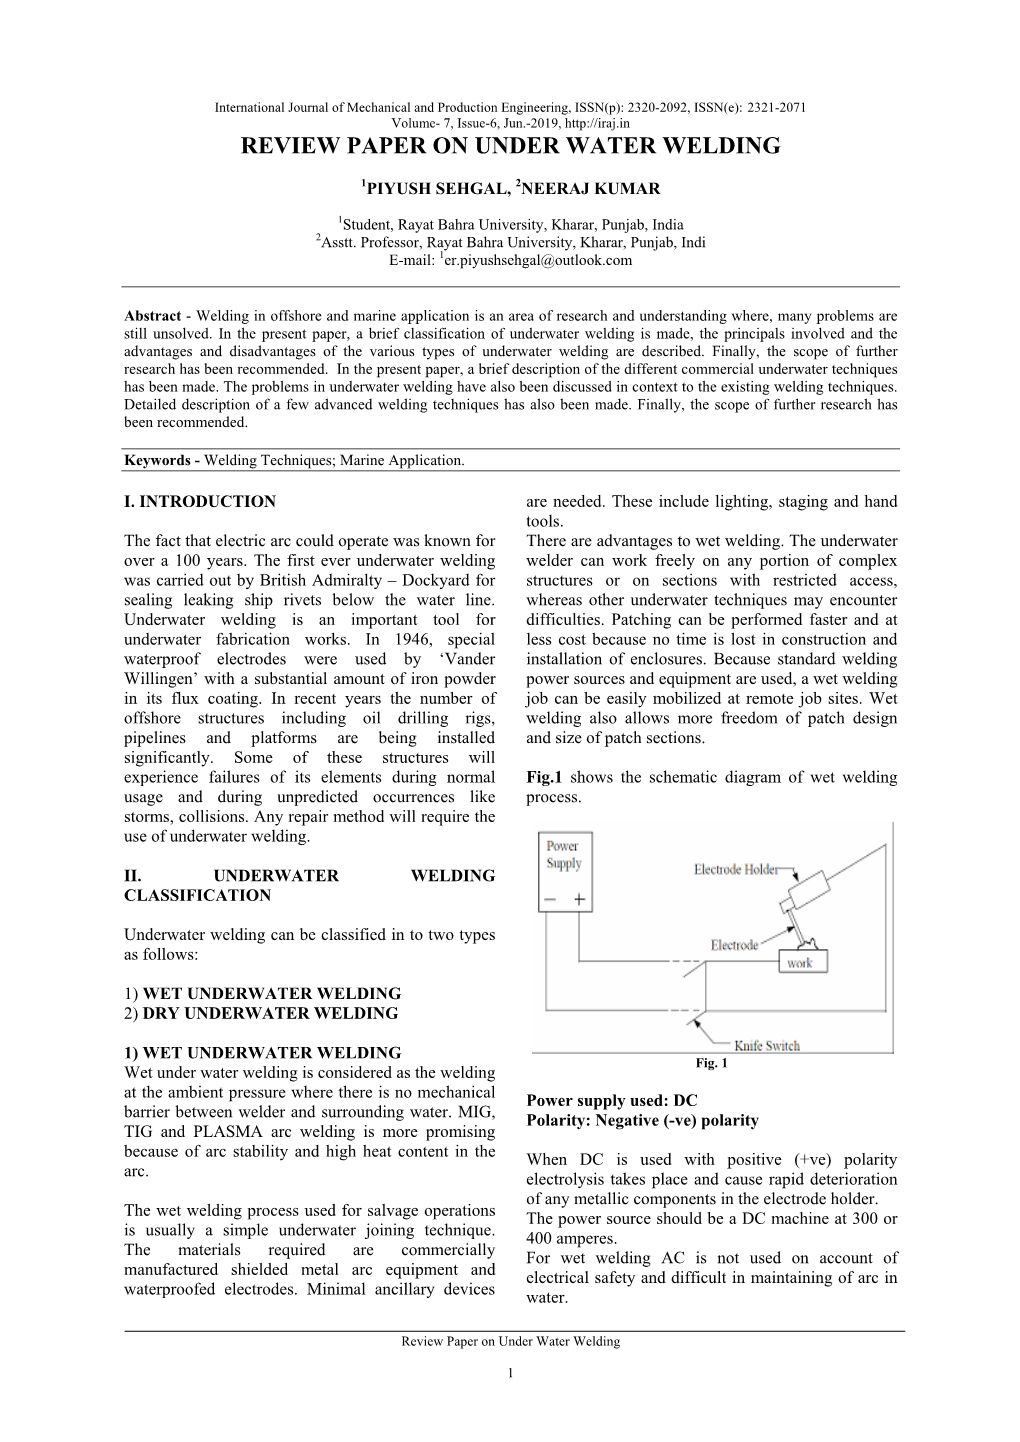 Review Paper on Under Water Welding